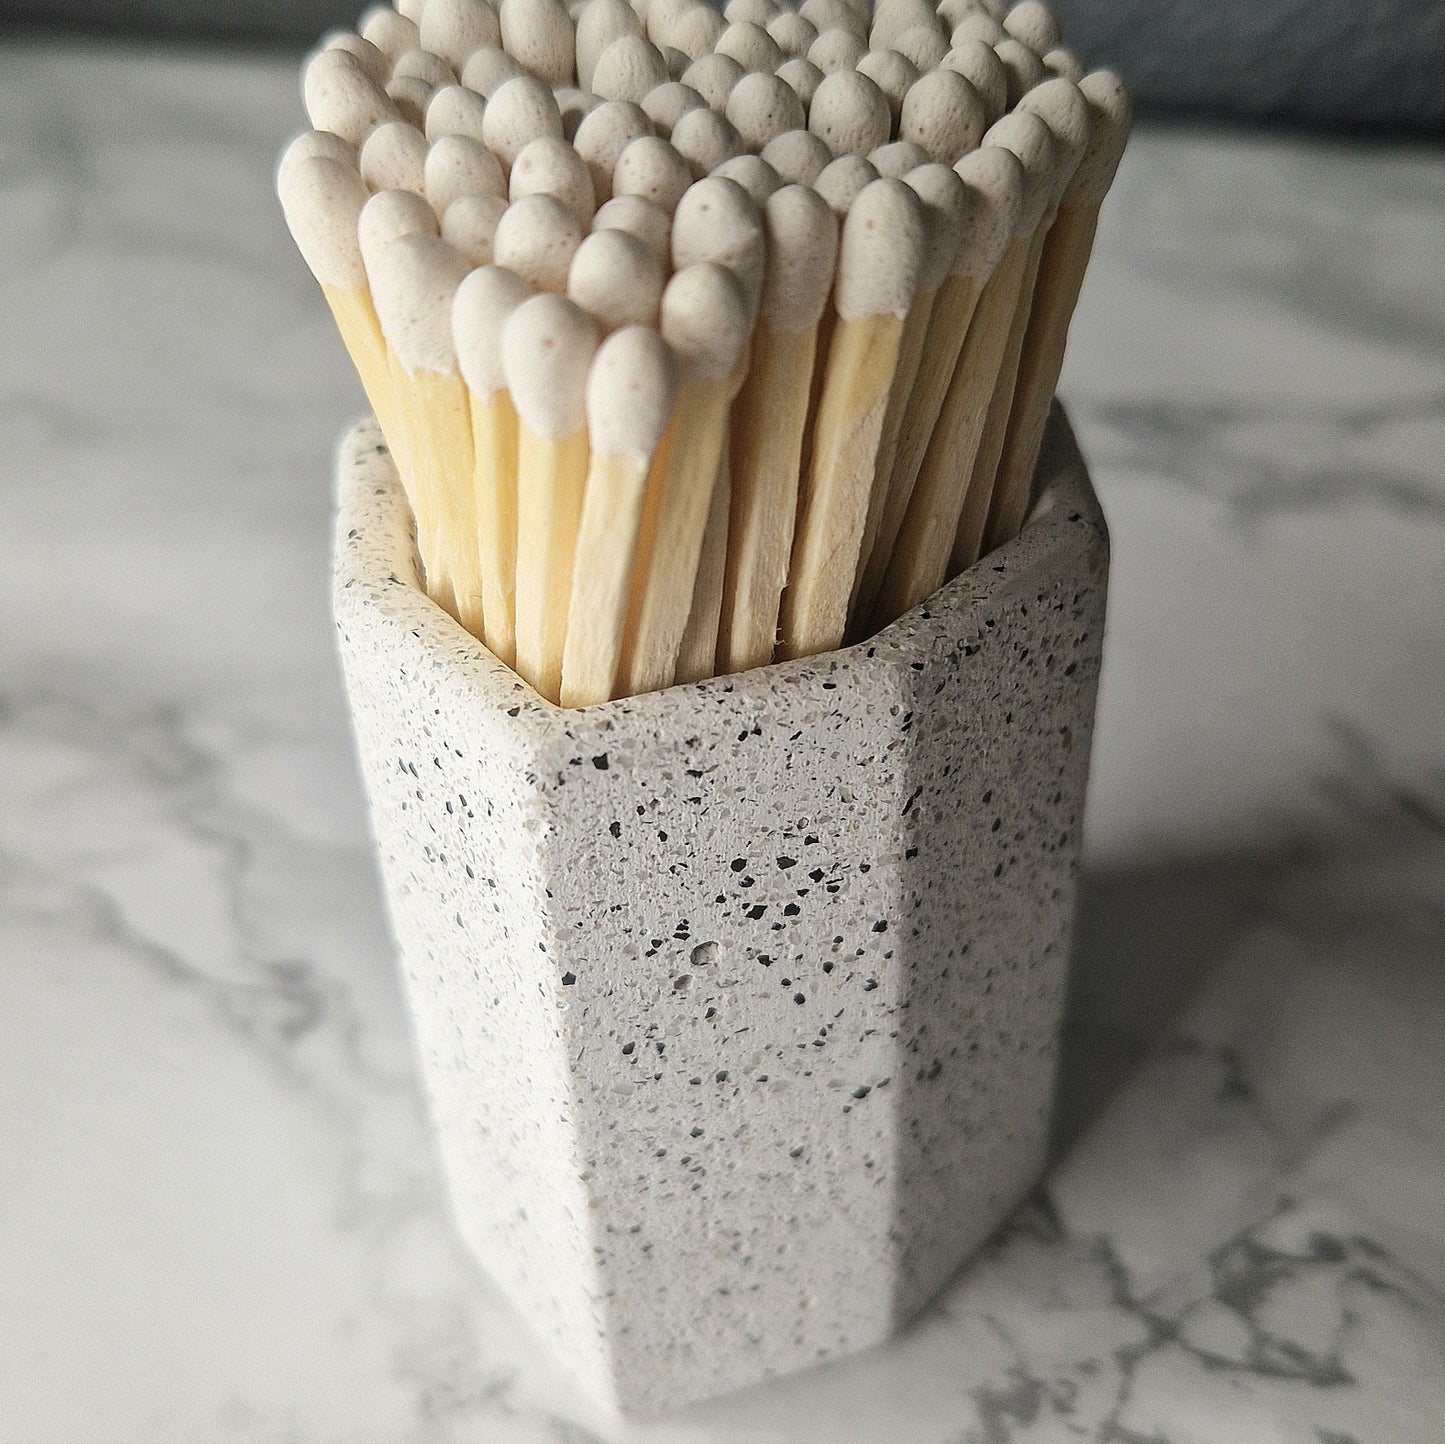 Heart Match Holder Pots filled with matches close up